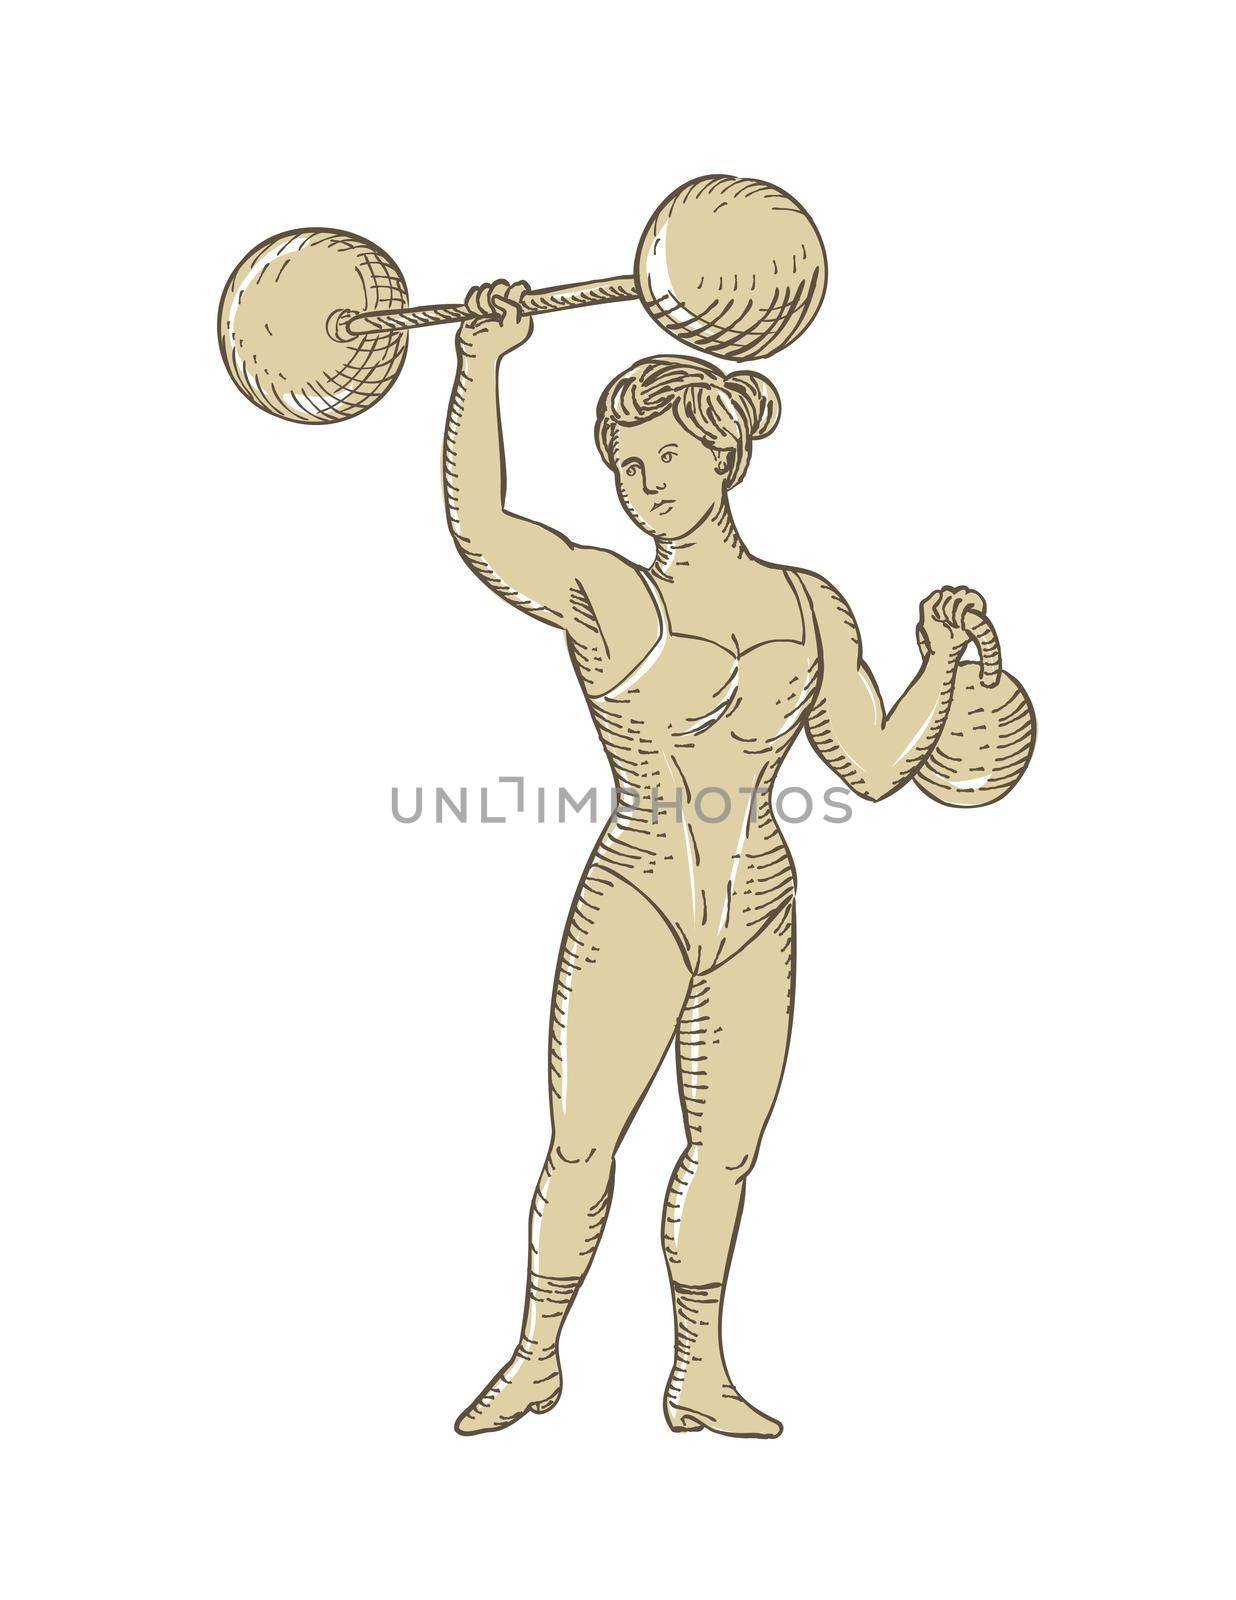 Vintage Circus Strongwoman Female or Lady Strongman Lifting Barbell on One Hand and Kettlebell in Etching Engraving Style  by patrimonio